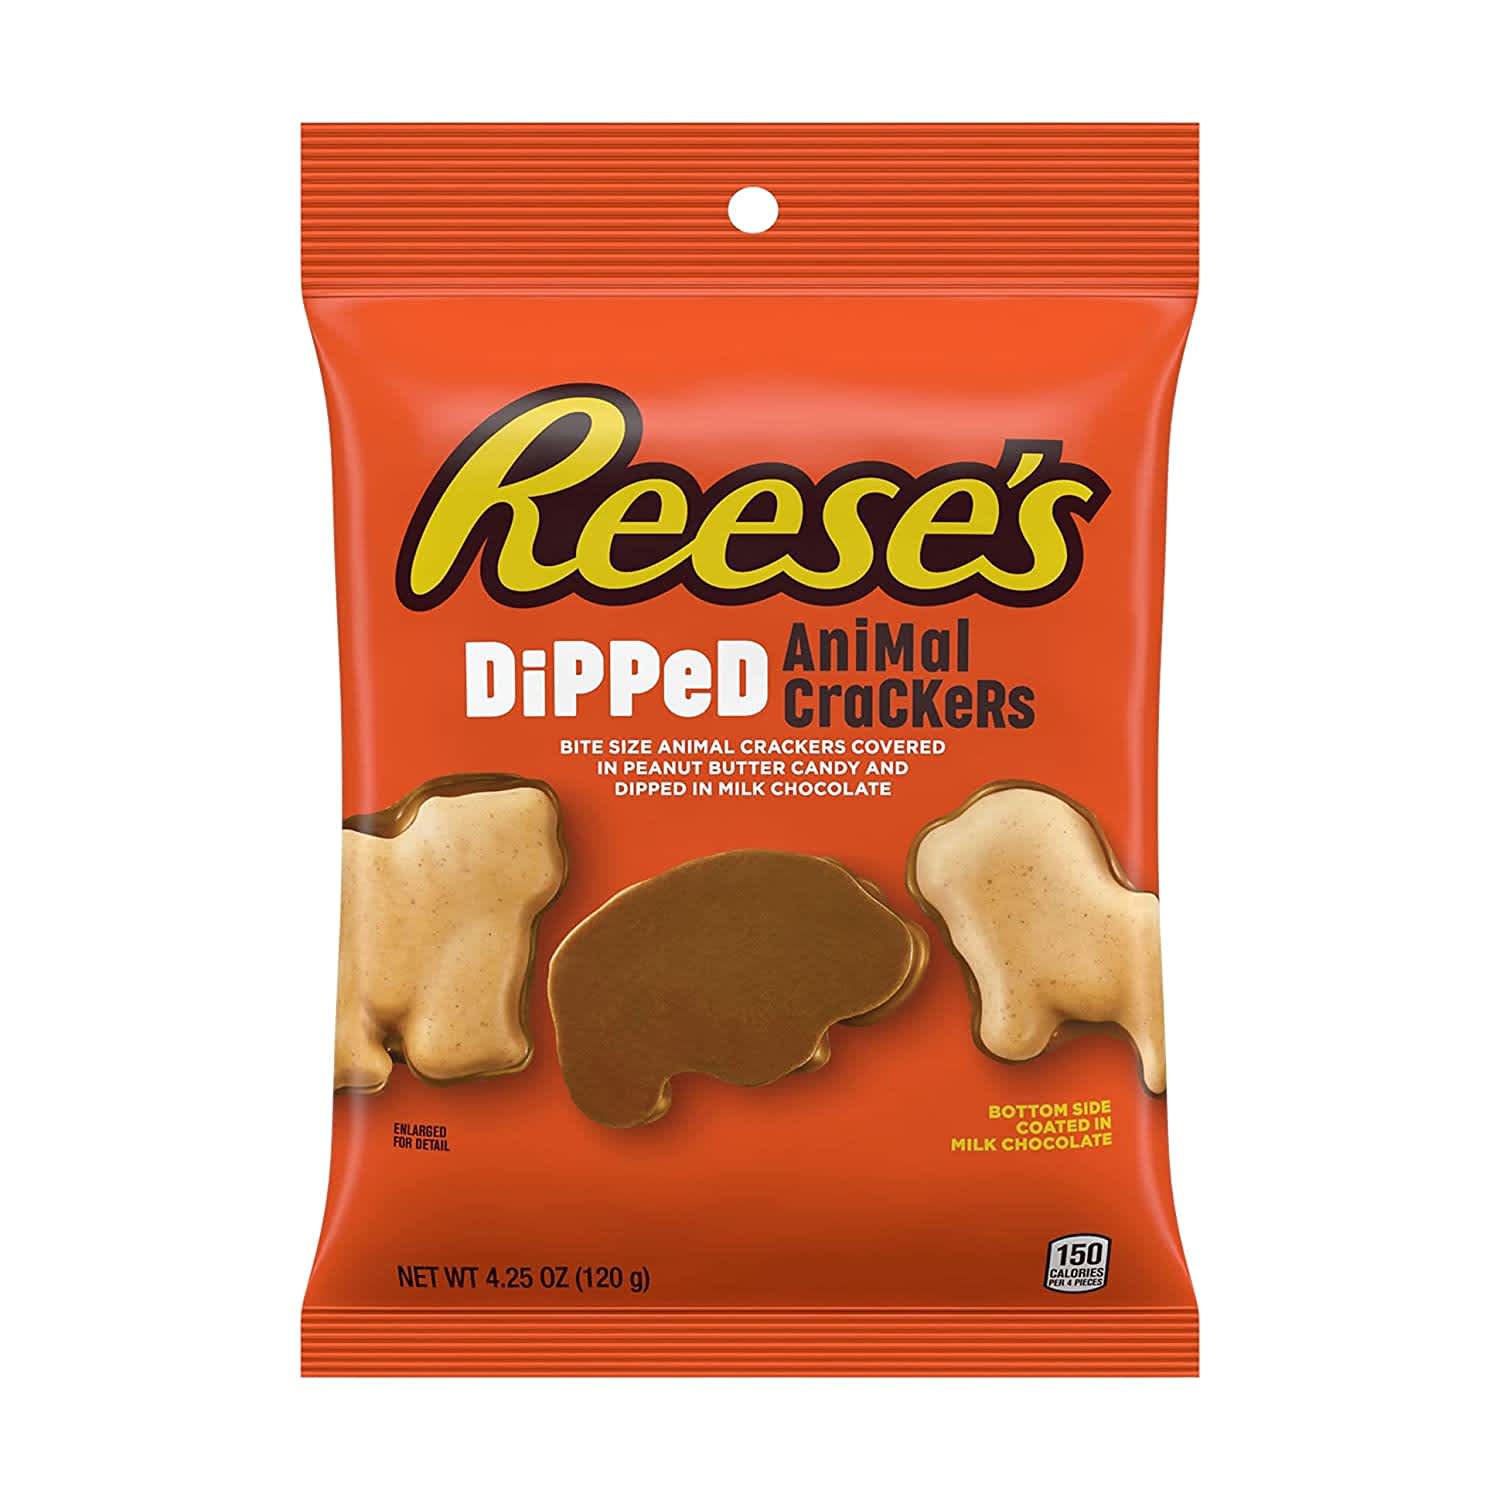 Reese's Dipped Animal Crackers Are Hitting Shelves Soon | Kitchn